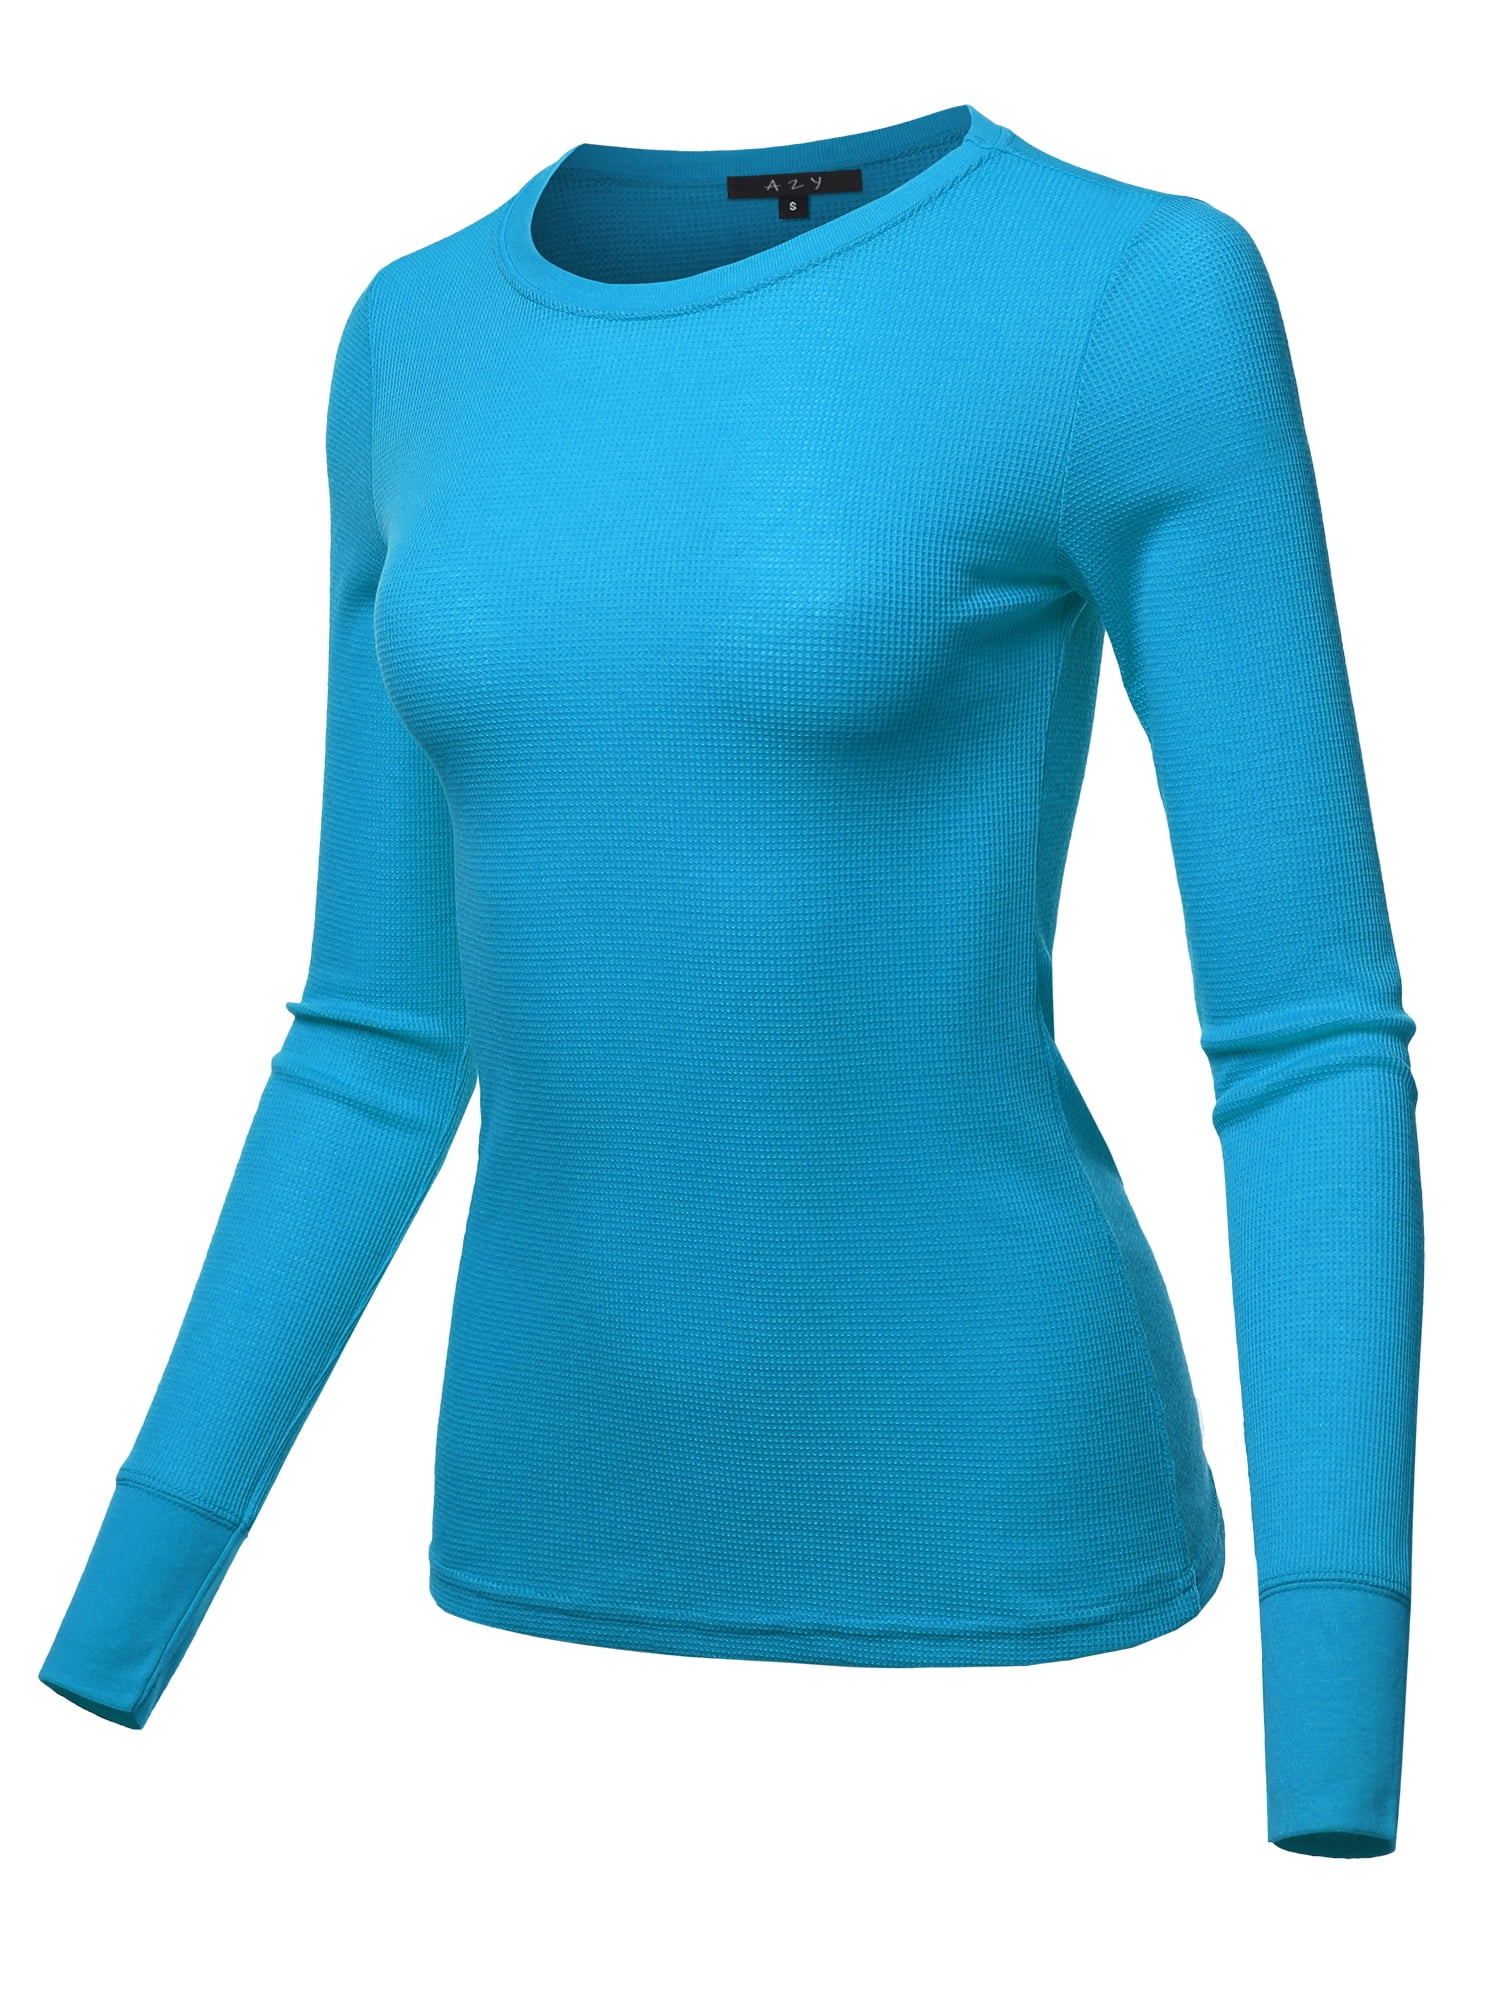 A2Y Women's Basic Solid Long Sleeve Crew Neck Fitted Thermal Top Shirt ...